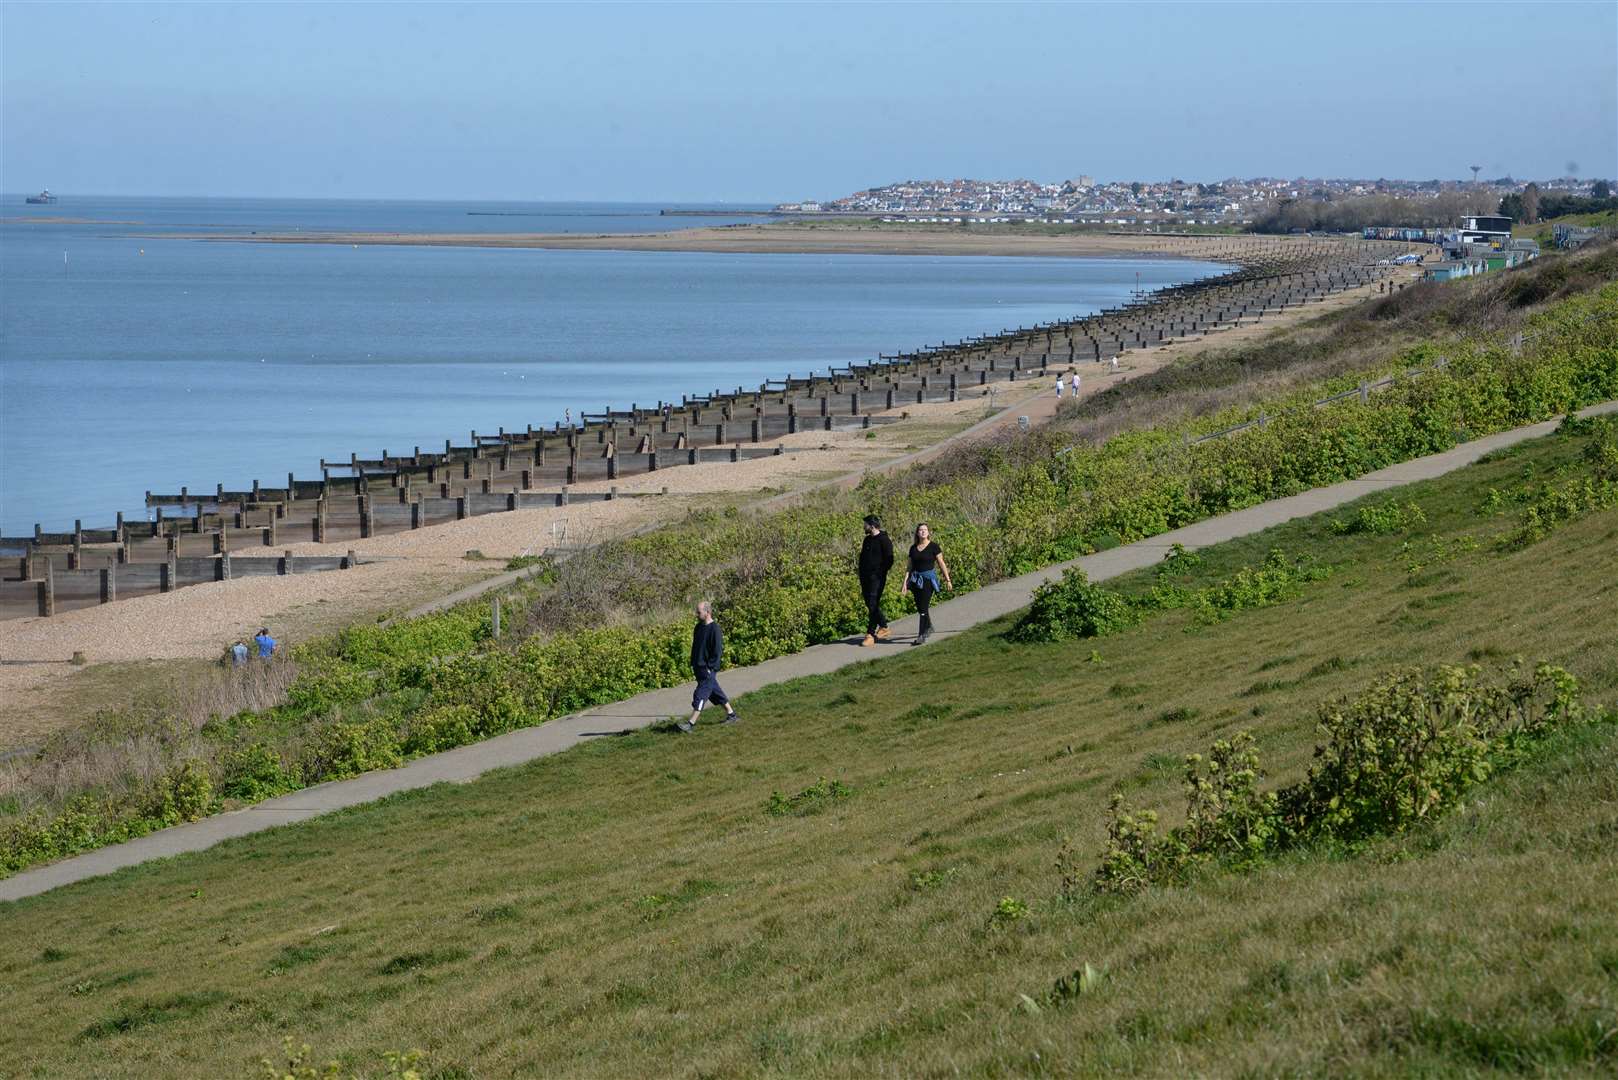 Tankerton Slopes near Whitstable is a popular spot for residents and visitors. Library picture